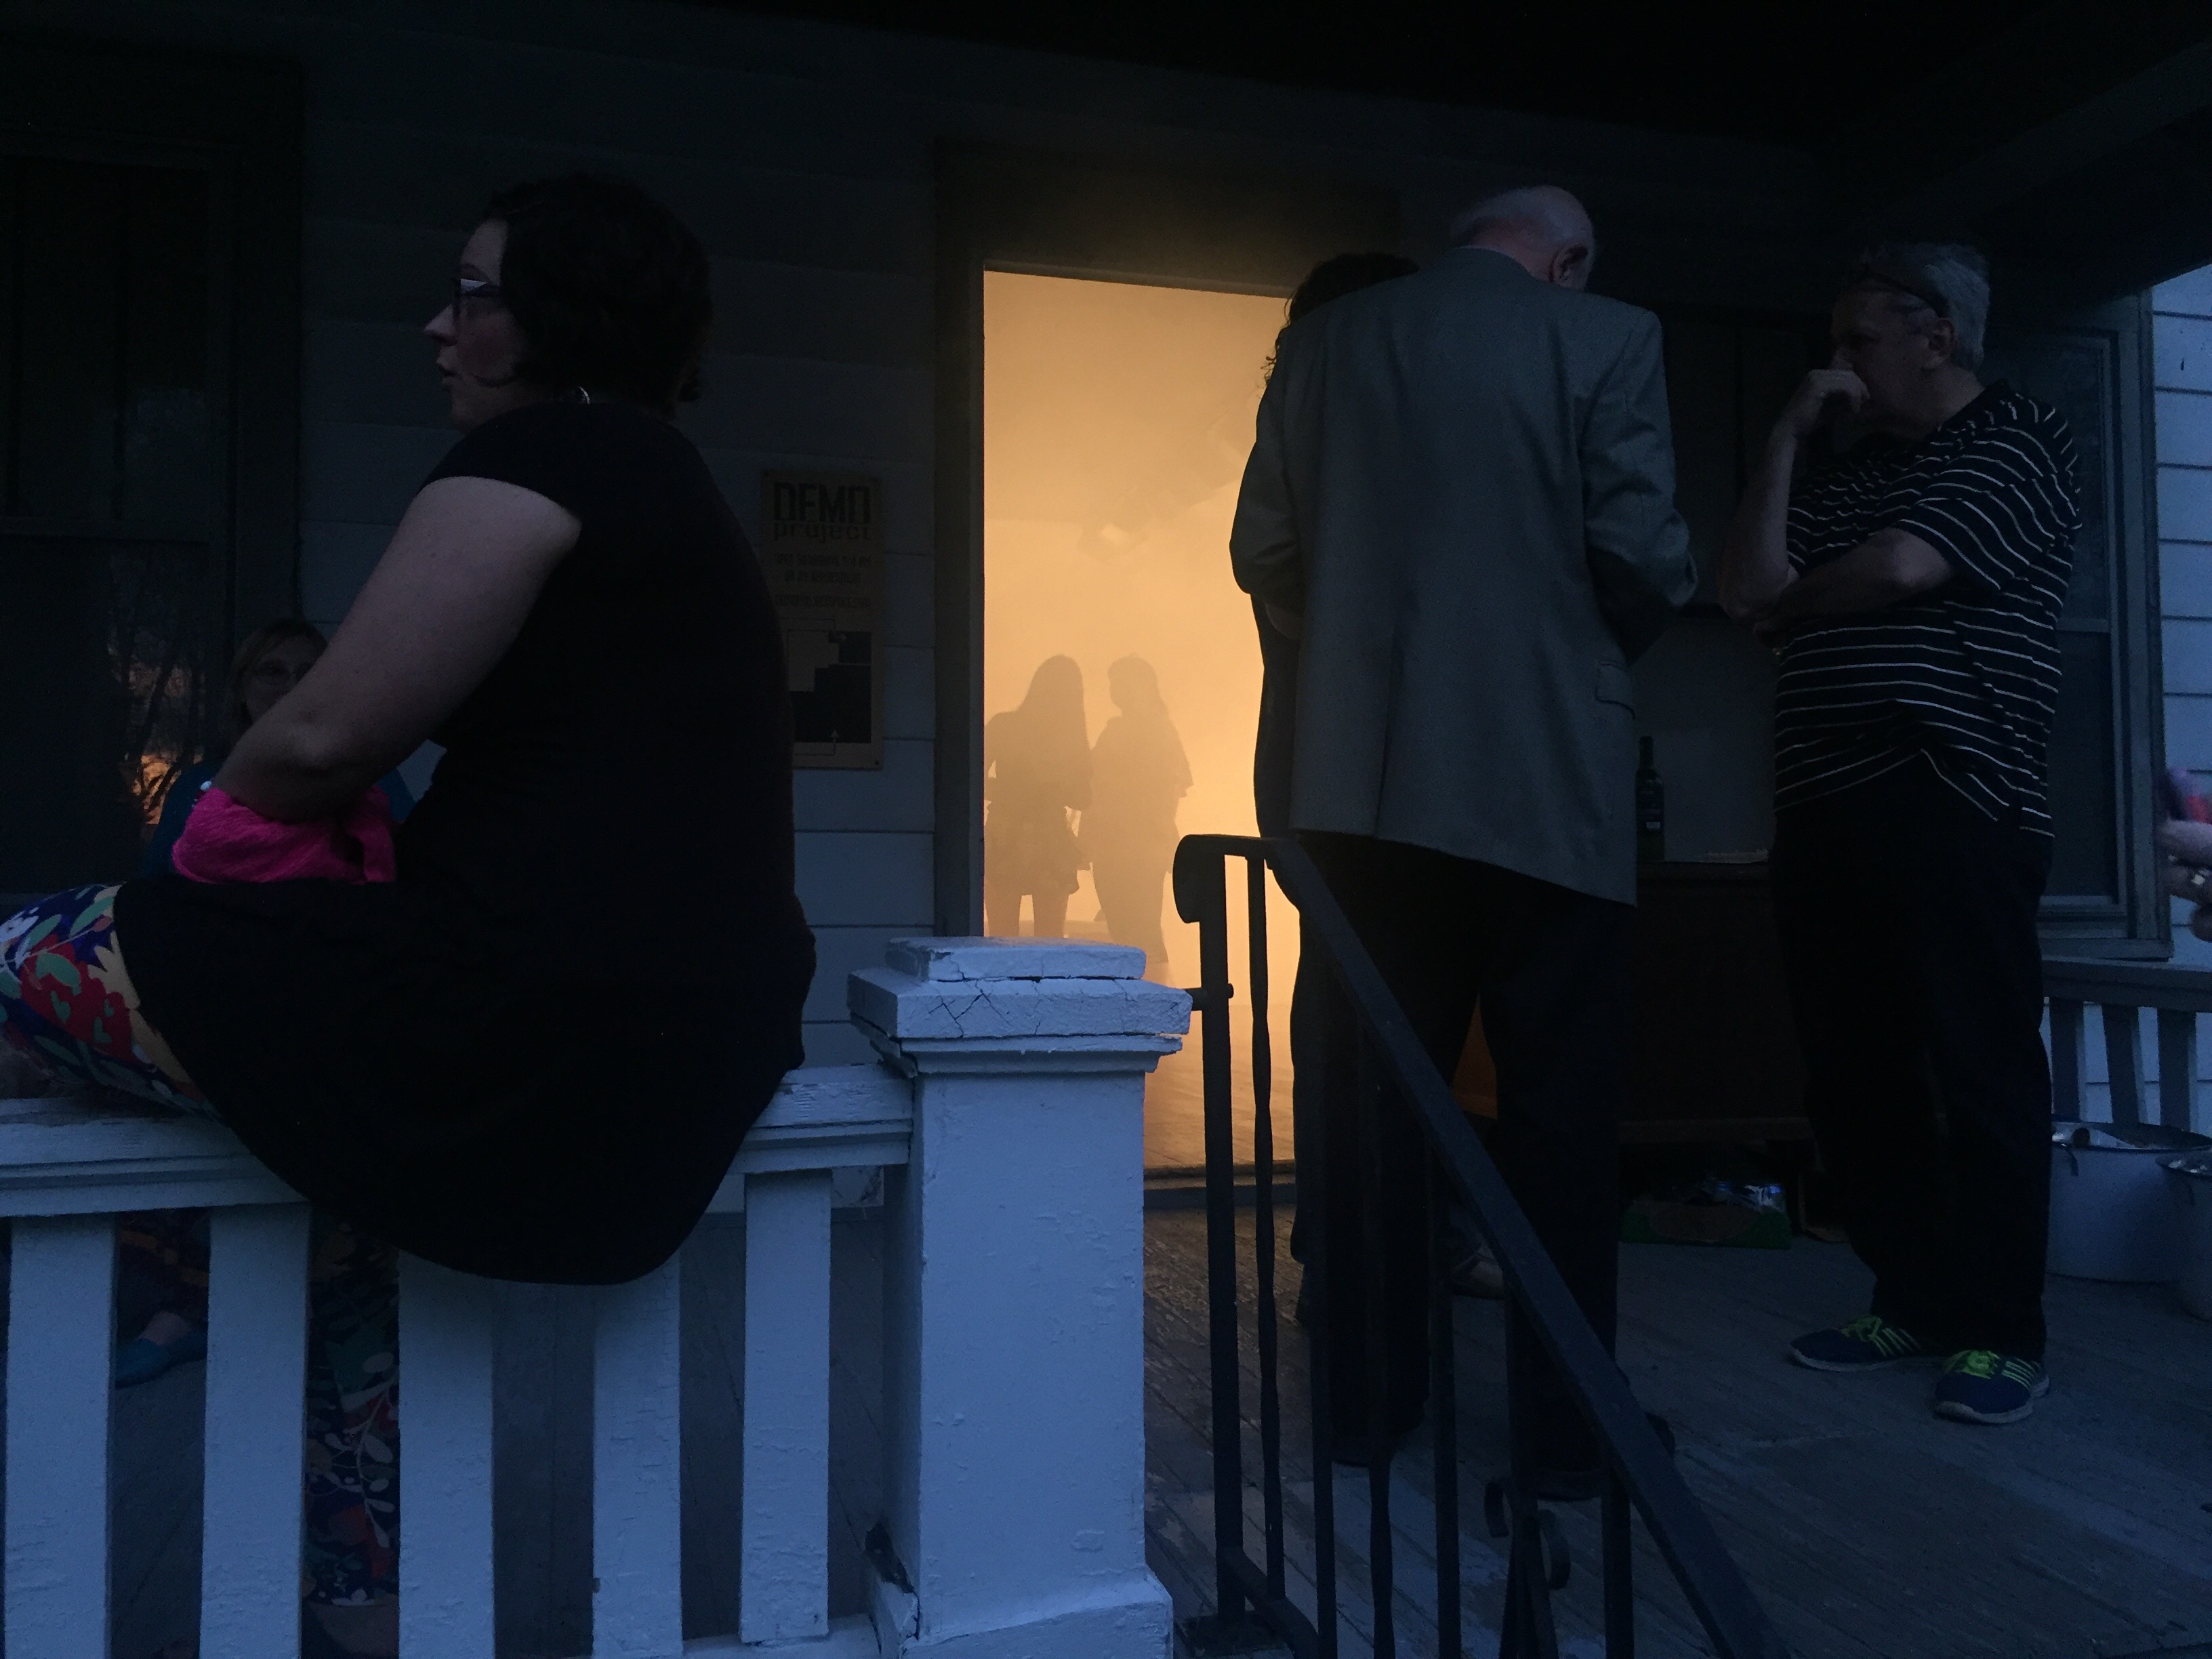 Image: Reception and entrance to Nobody's Home by Lyndon Barrois Jr., Addoley Dzegede, Cole Lu, and Catalina Ouyang. DEMO Project, May 2017. In the foreground, a few visitors linger on the front porch at dusk. Through the open doorway in the background, two figures stand viewing the exhibition through the orange haze. The Image courtesy of Lyndon Barrois Jr.